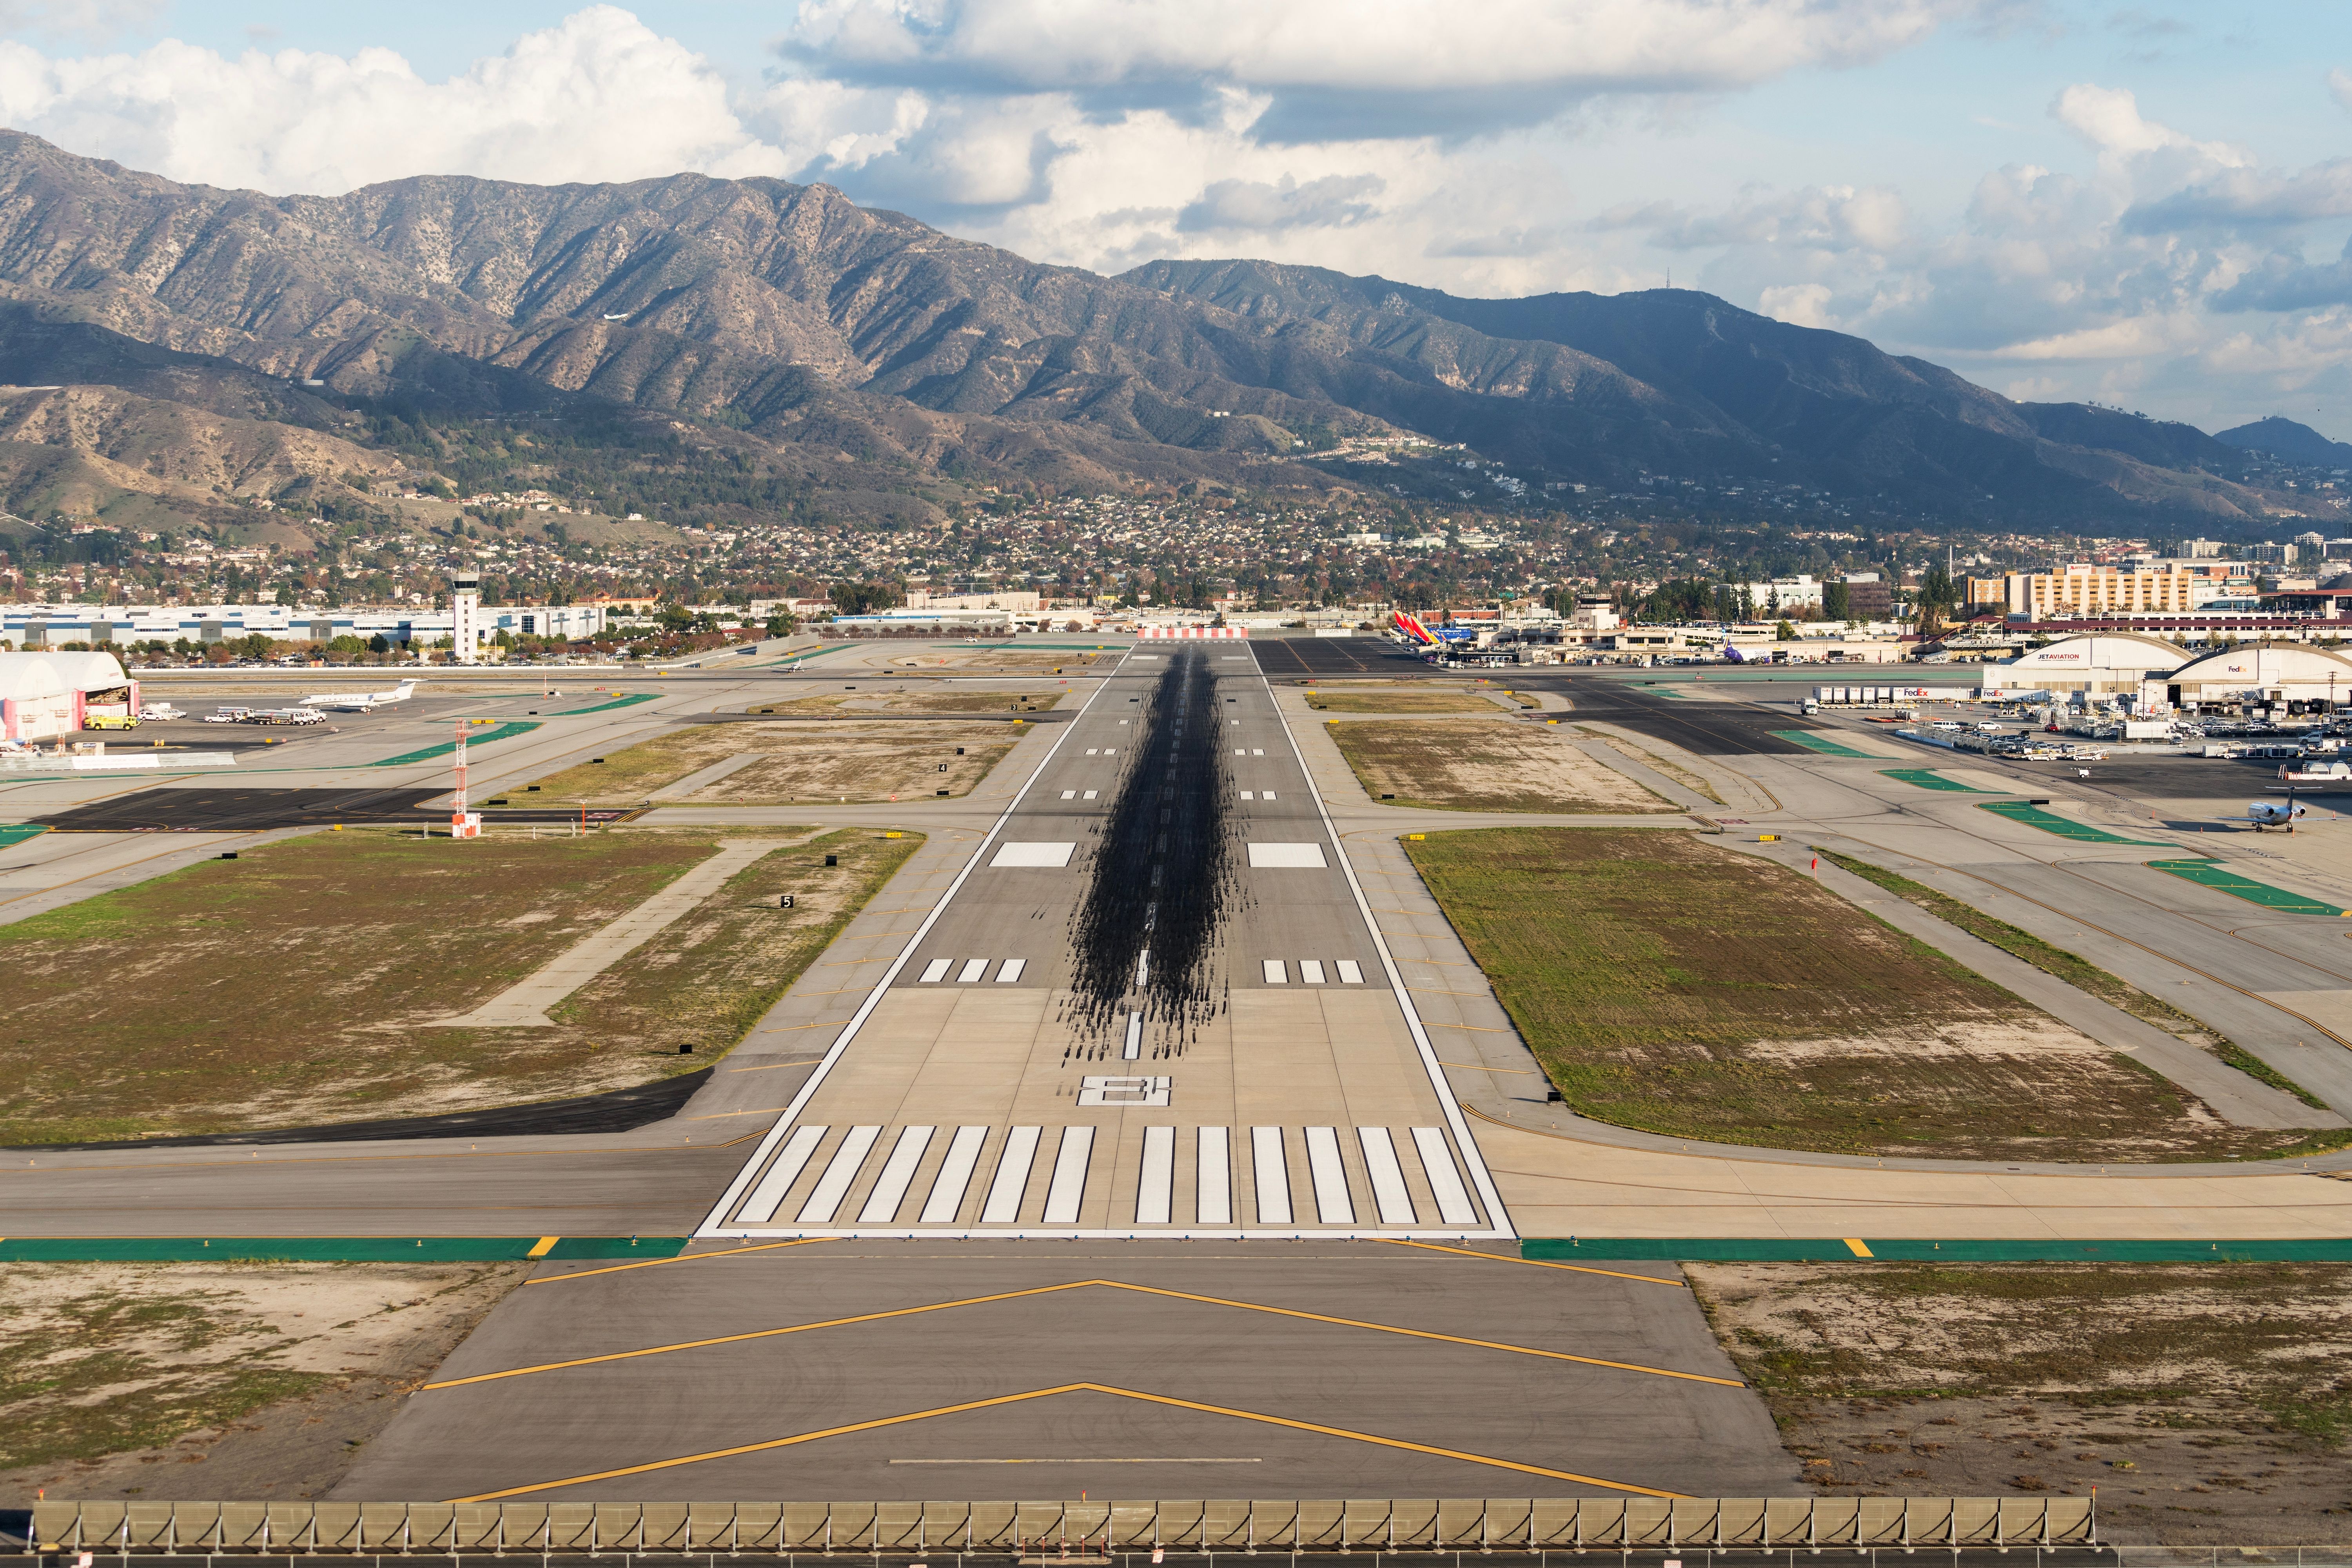 An easterly view of the final approach to Burbank's runway 8.